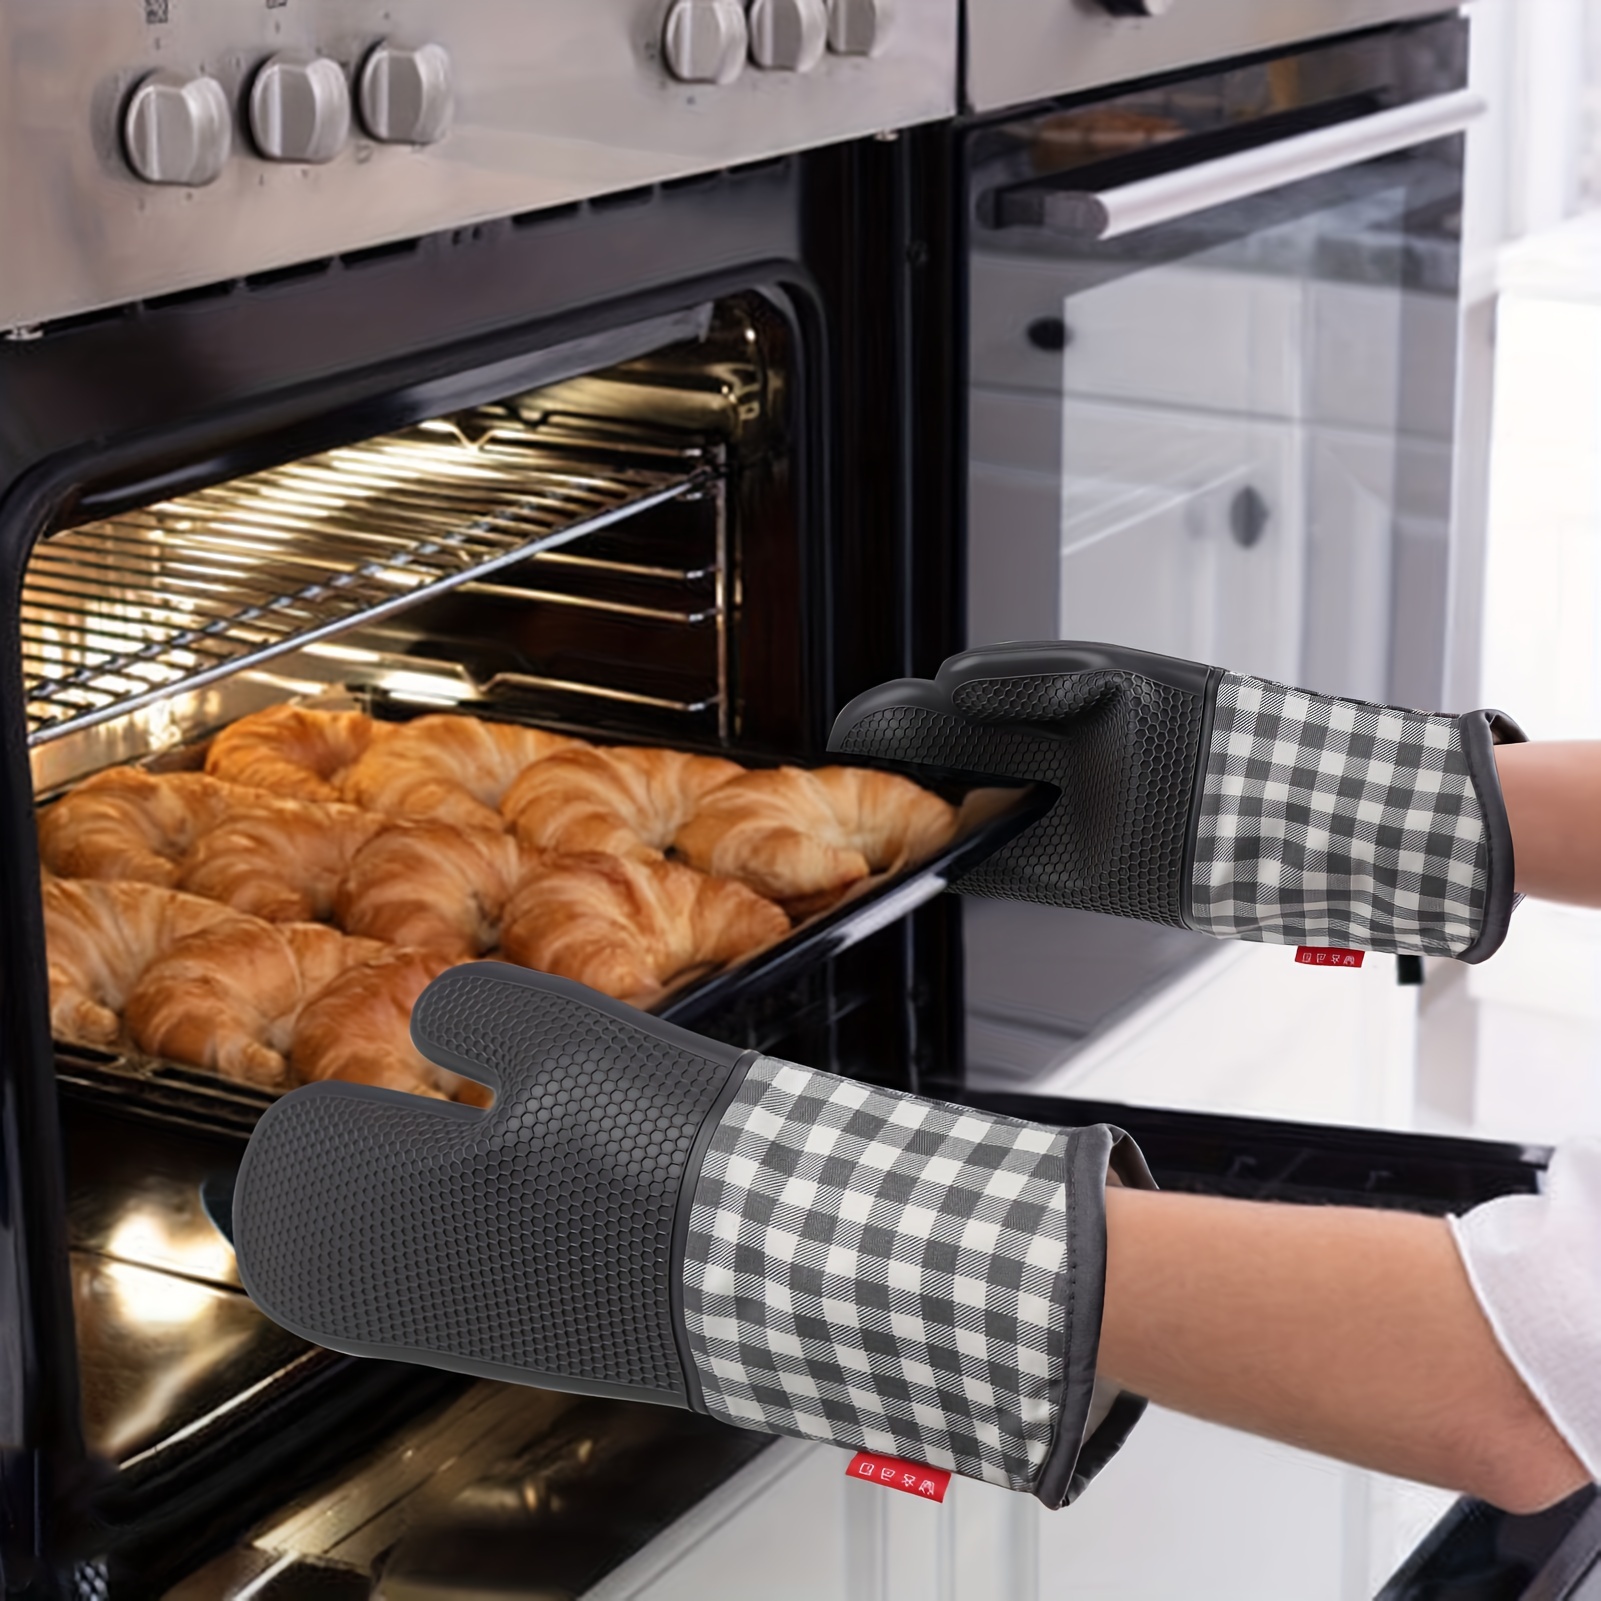 4PCS Oven Mitts and Pot Holders Heavy Duty Cooking Gloves Heat